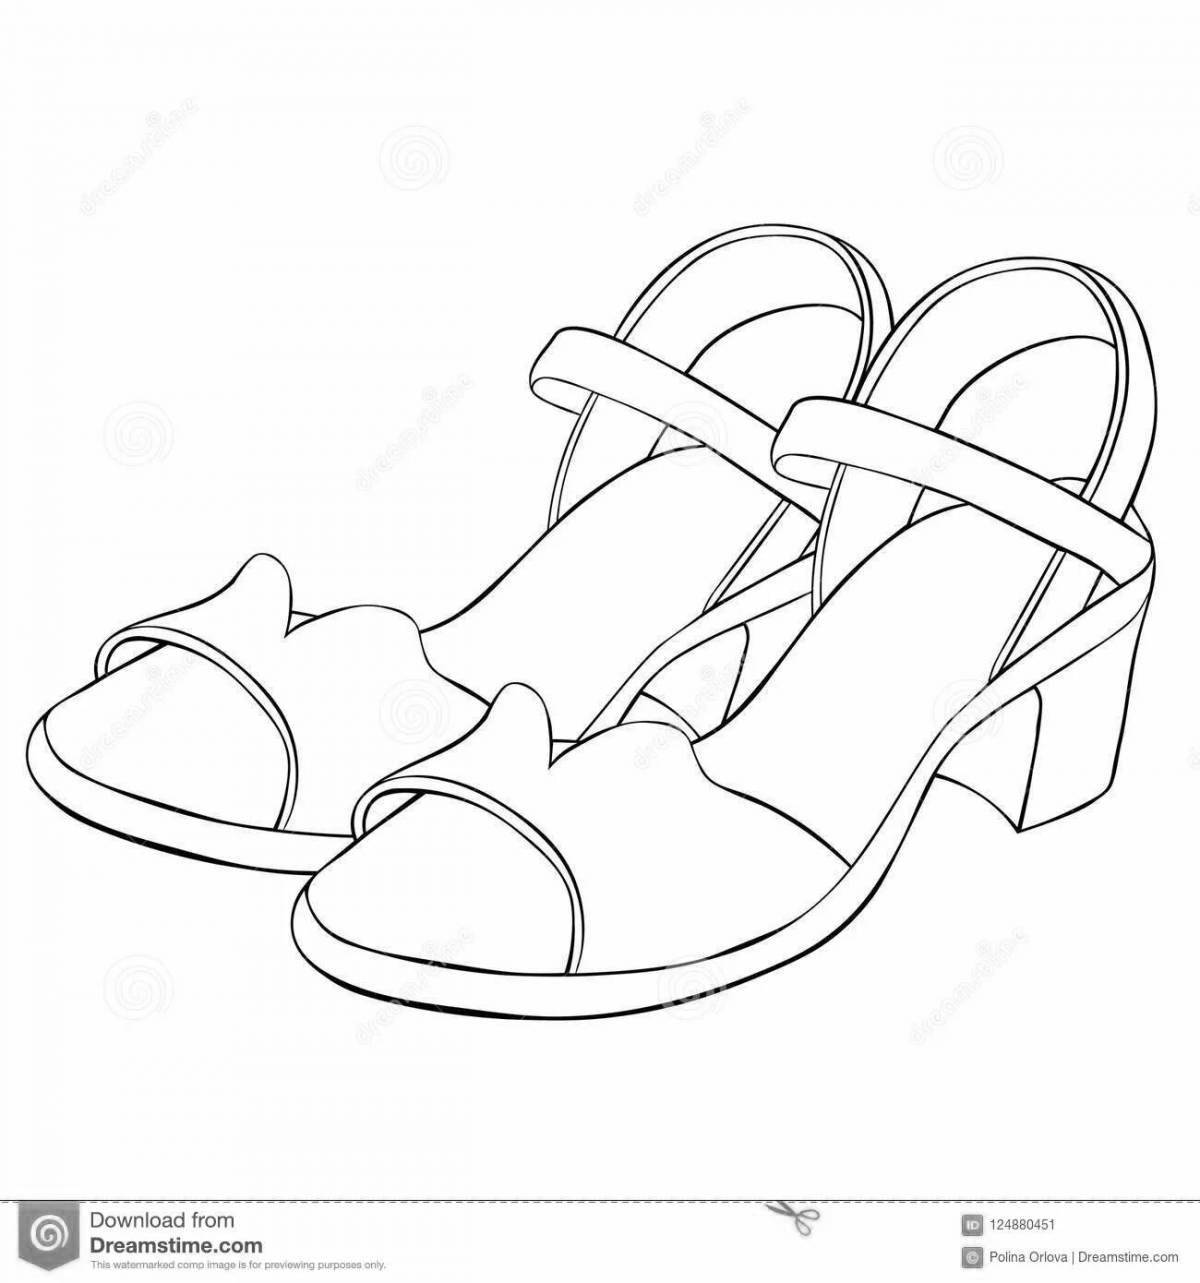 Mystic sandals coloring page